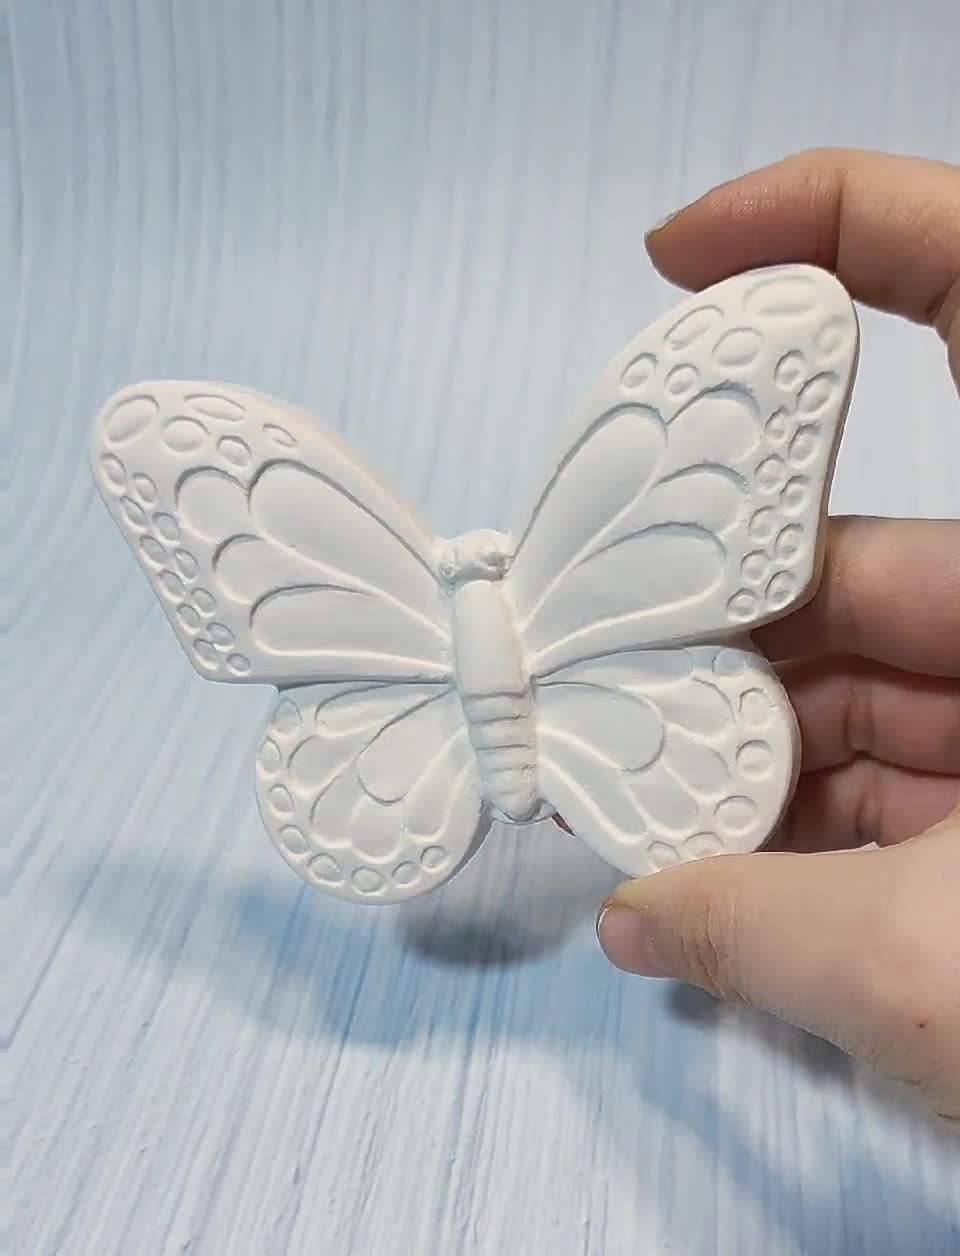 2 Pcs Butterfly Silicone Molds, AIFUDA 3D Big Resin Mold Butterfly Shaped DIY Epoxy Silicone Casting Molds for Wall Hanging Craft Art Decor, White